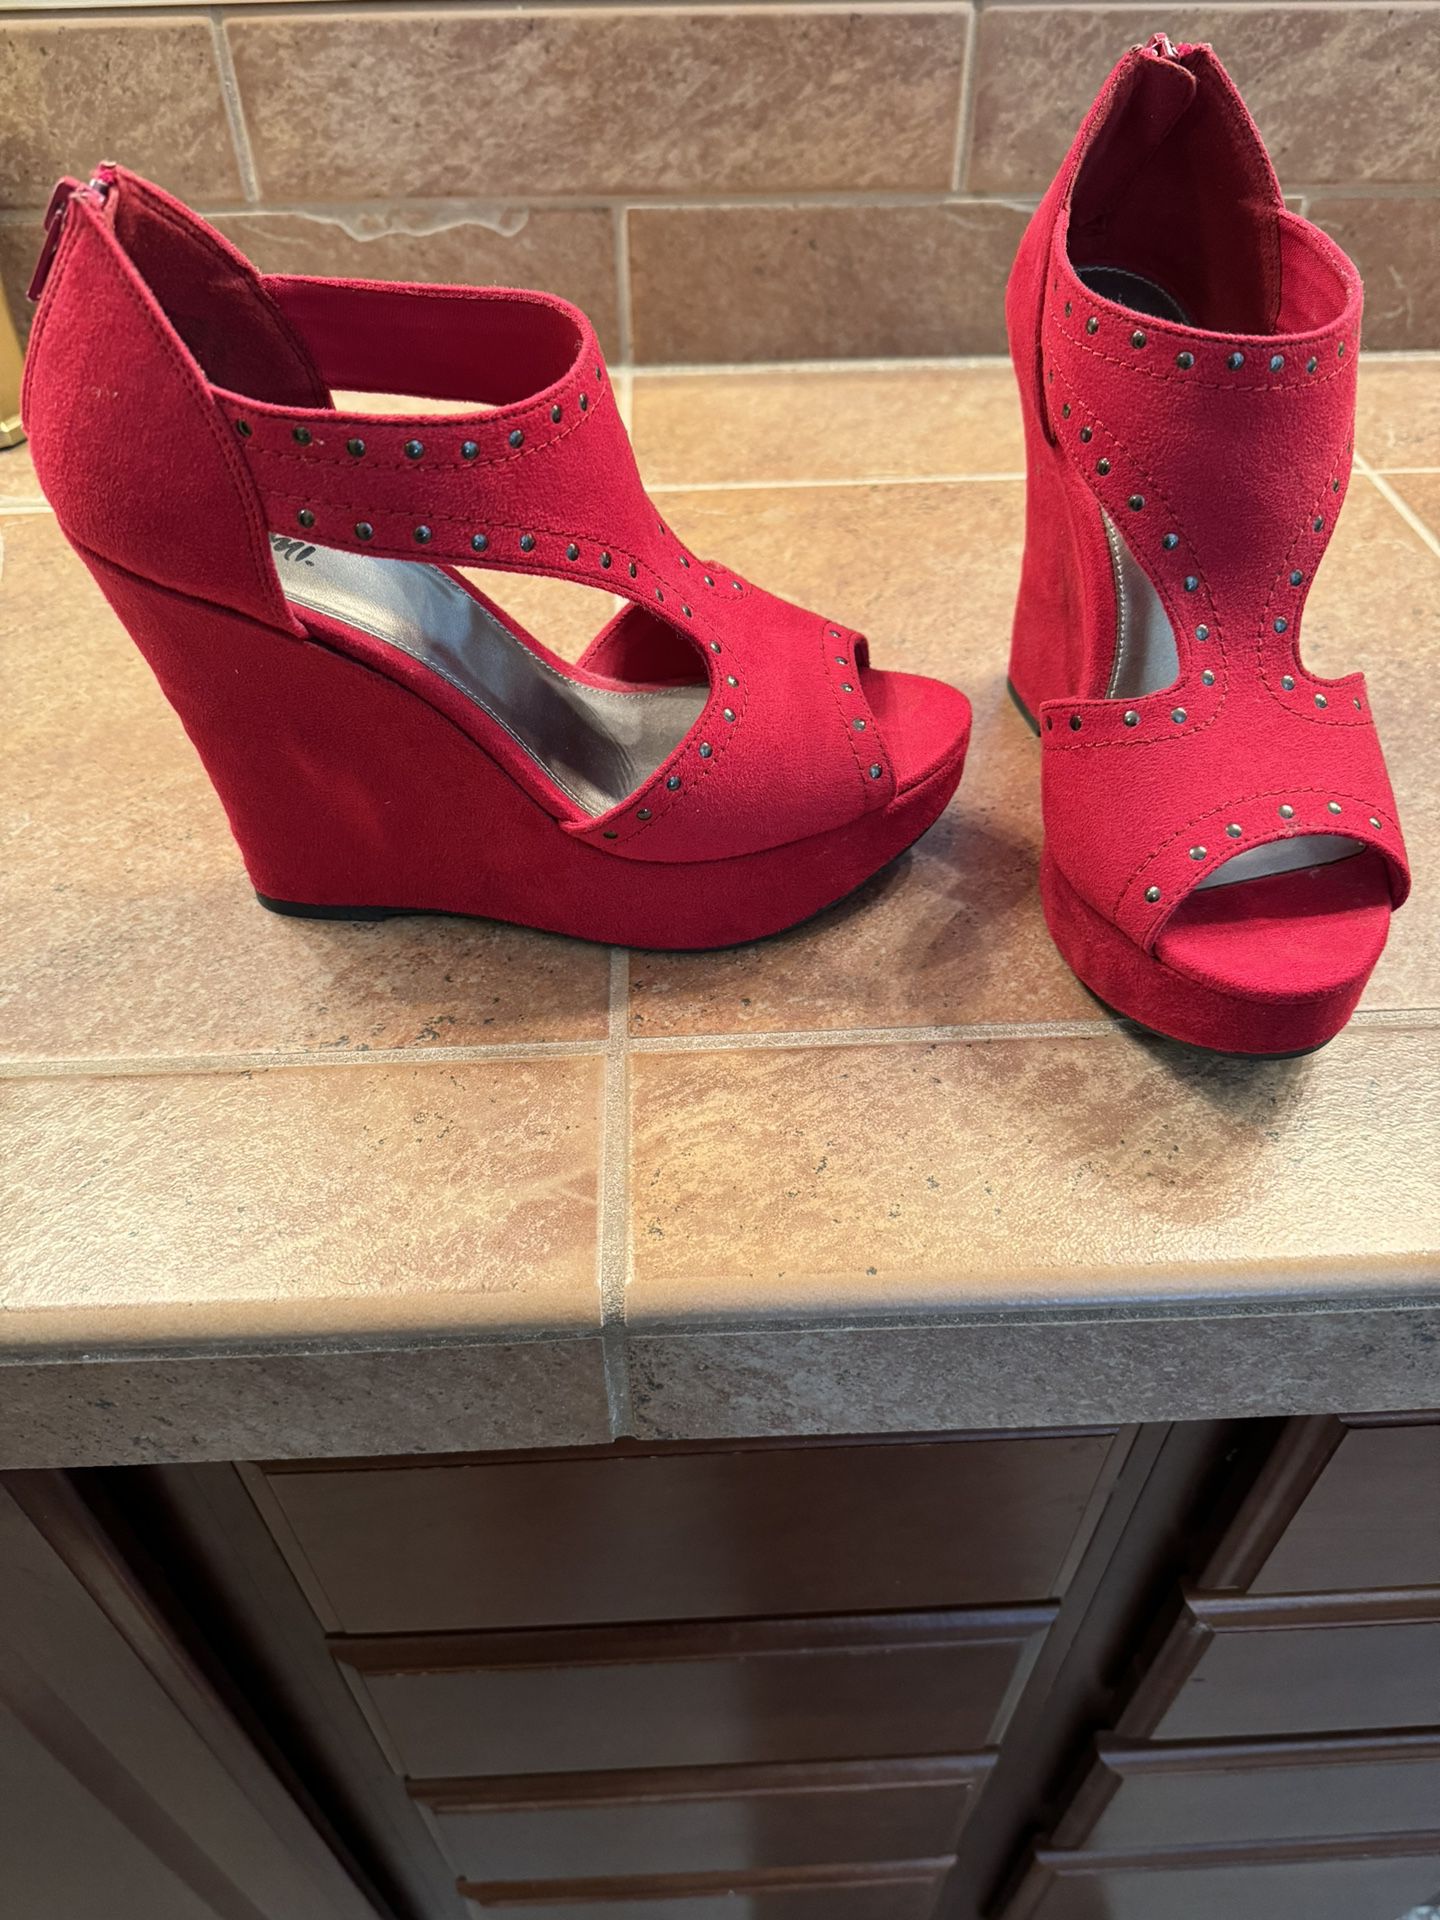 Red Fiona Heels, Size 9